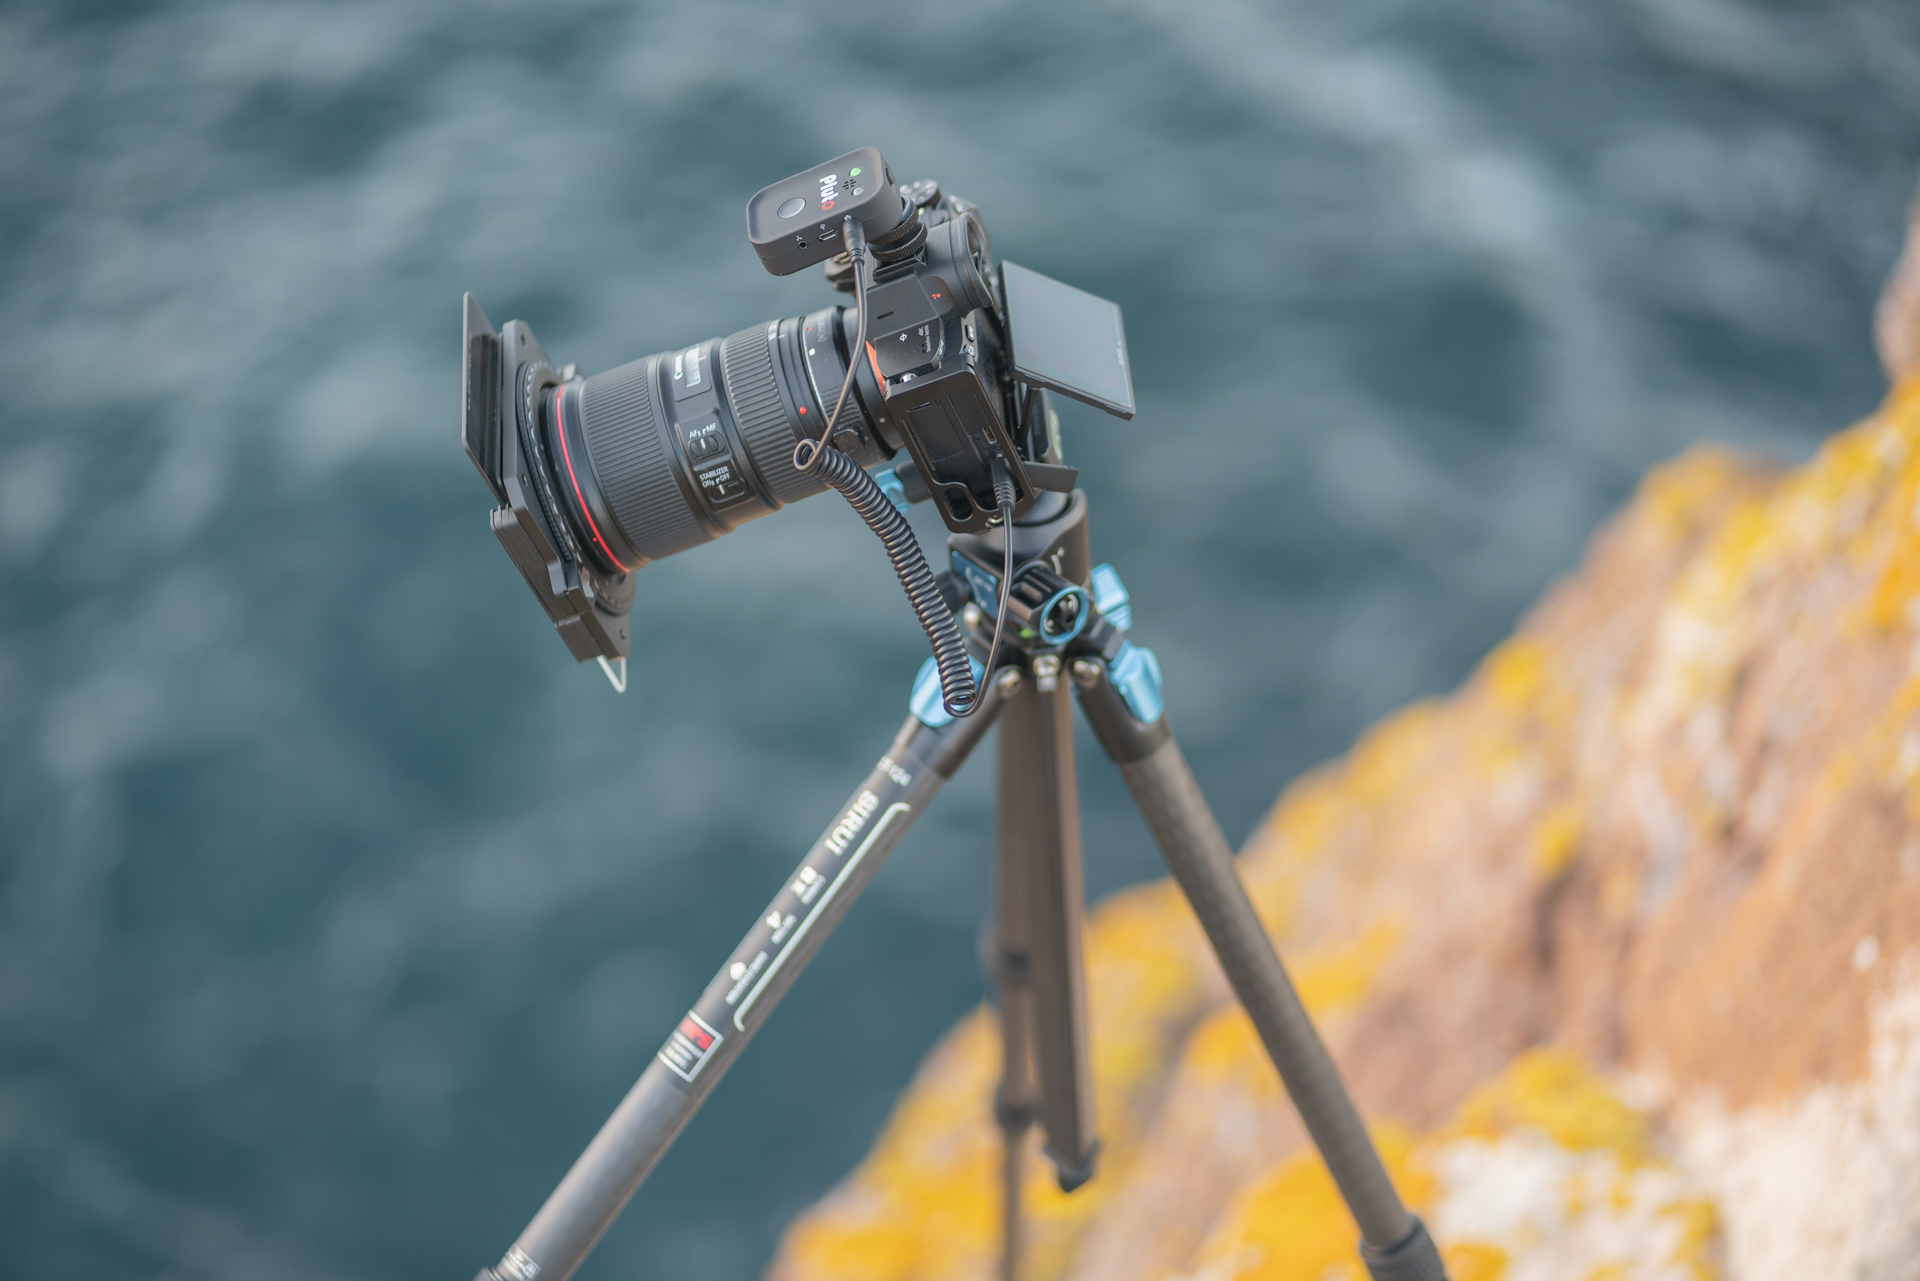 Sirui ST-124 Super Travelling Carbon Tripod with ST-10 Ball Head